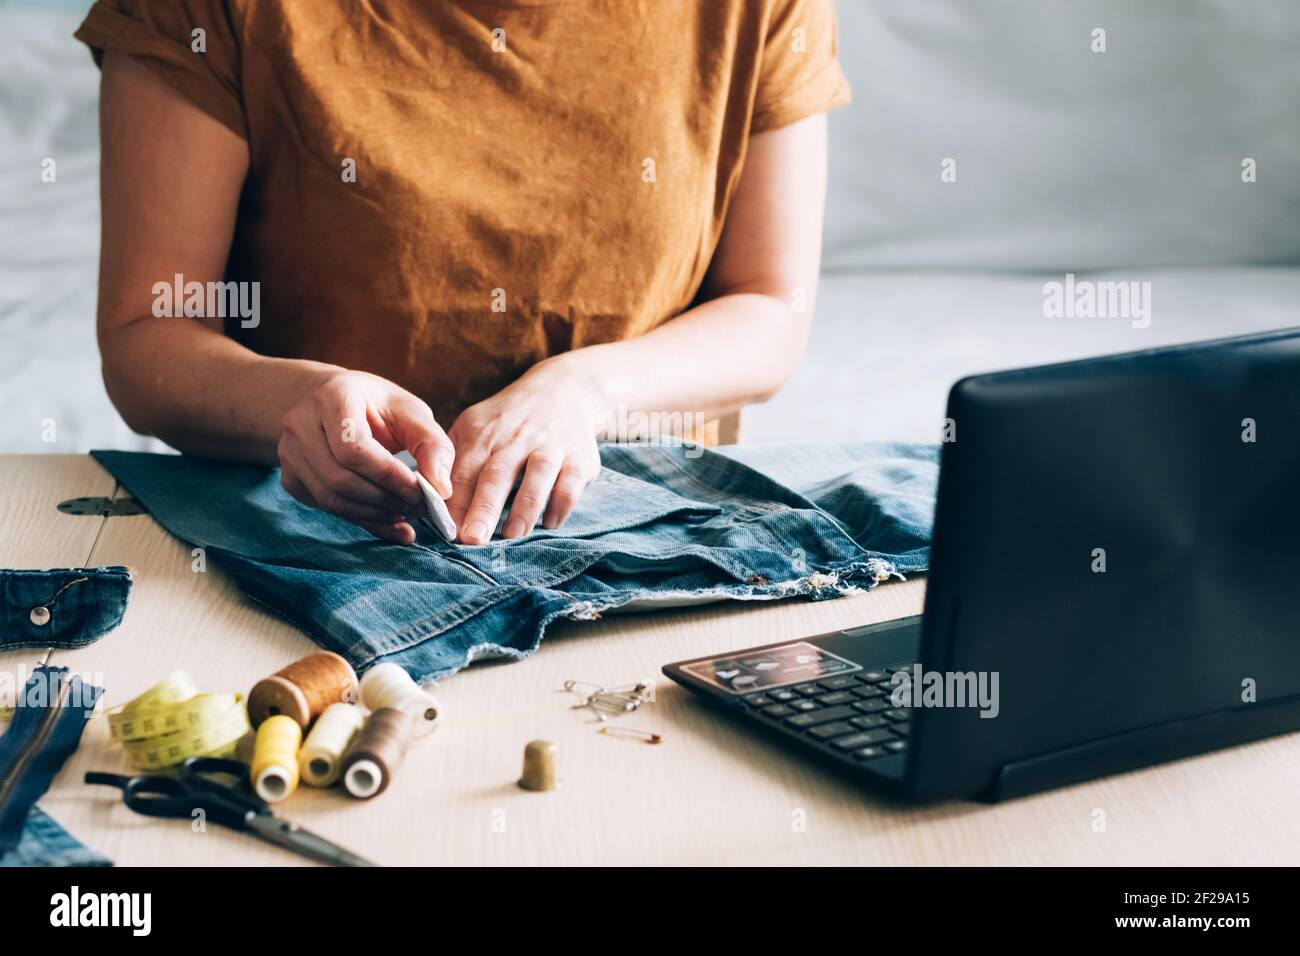 A woman is engaged in online training and looks at sewing lessons on a laptop. Concept of trendy online learning taking courses at home. Homemade need Stock Photo